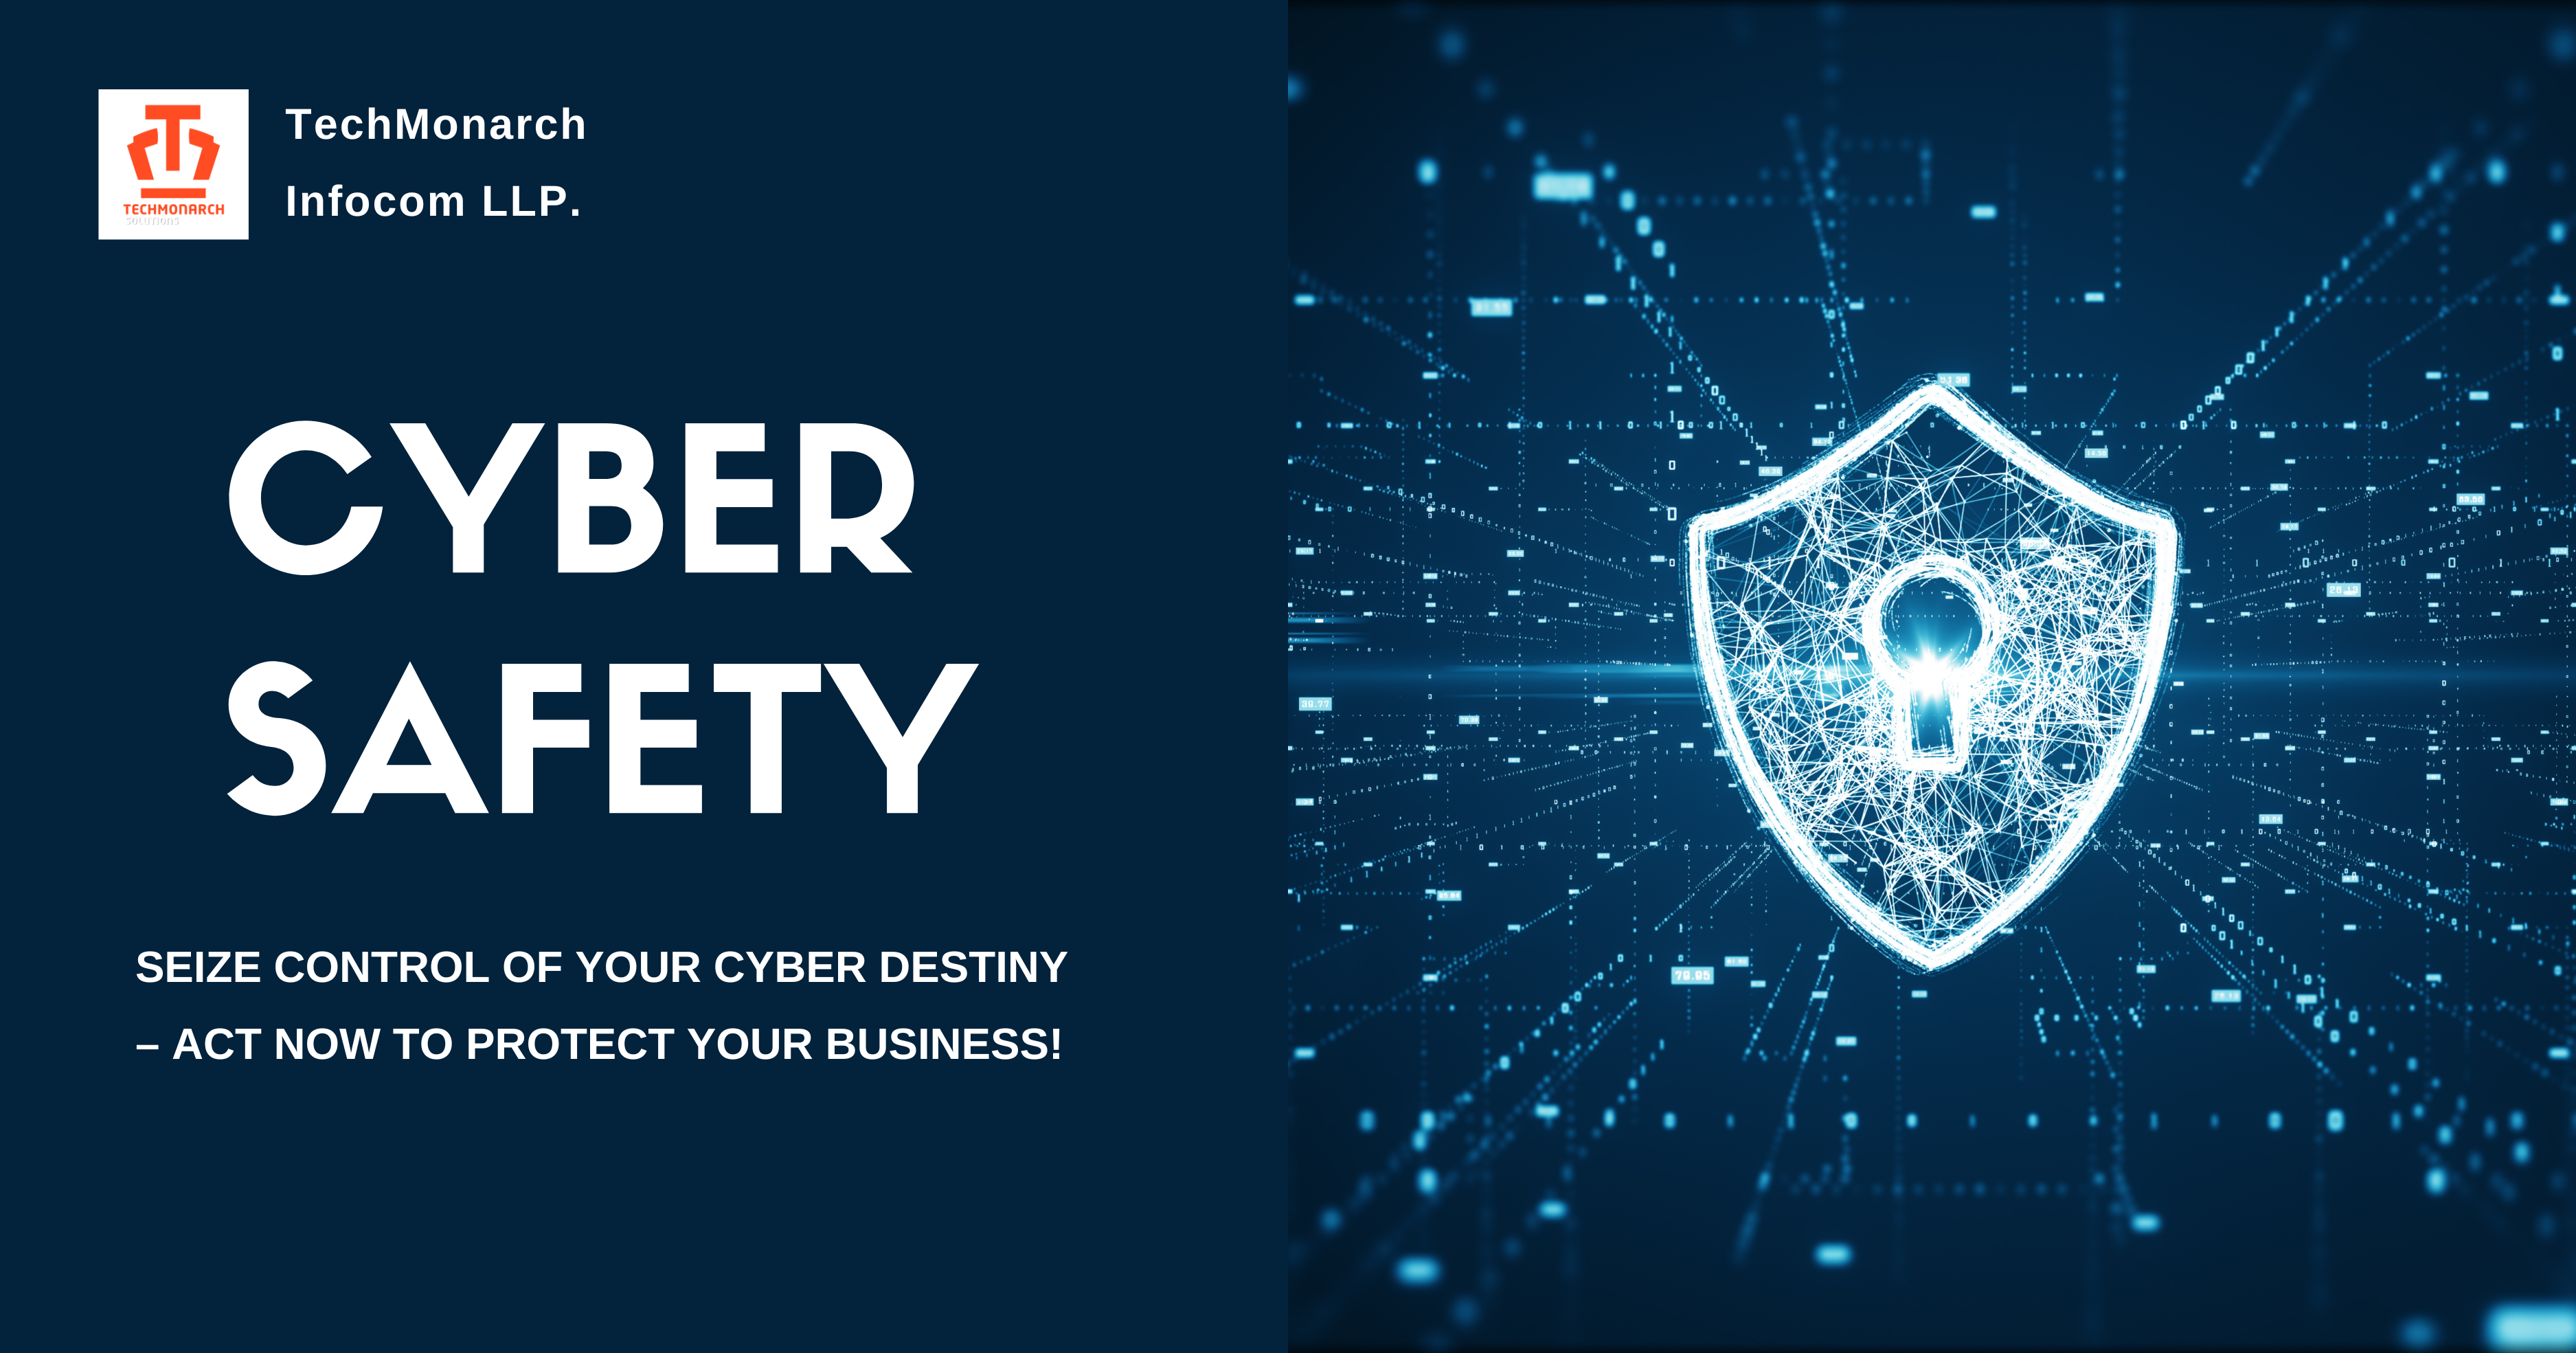 Beyond Firewalls: Strengthening Your Business’s Cyber Defenses